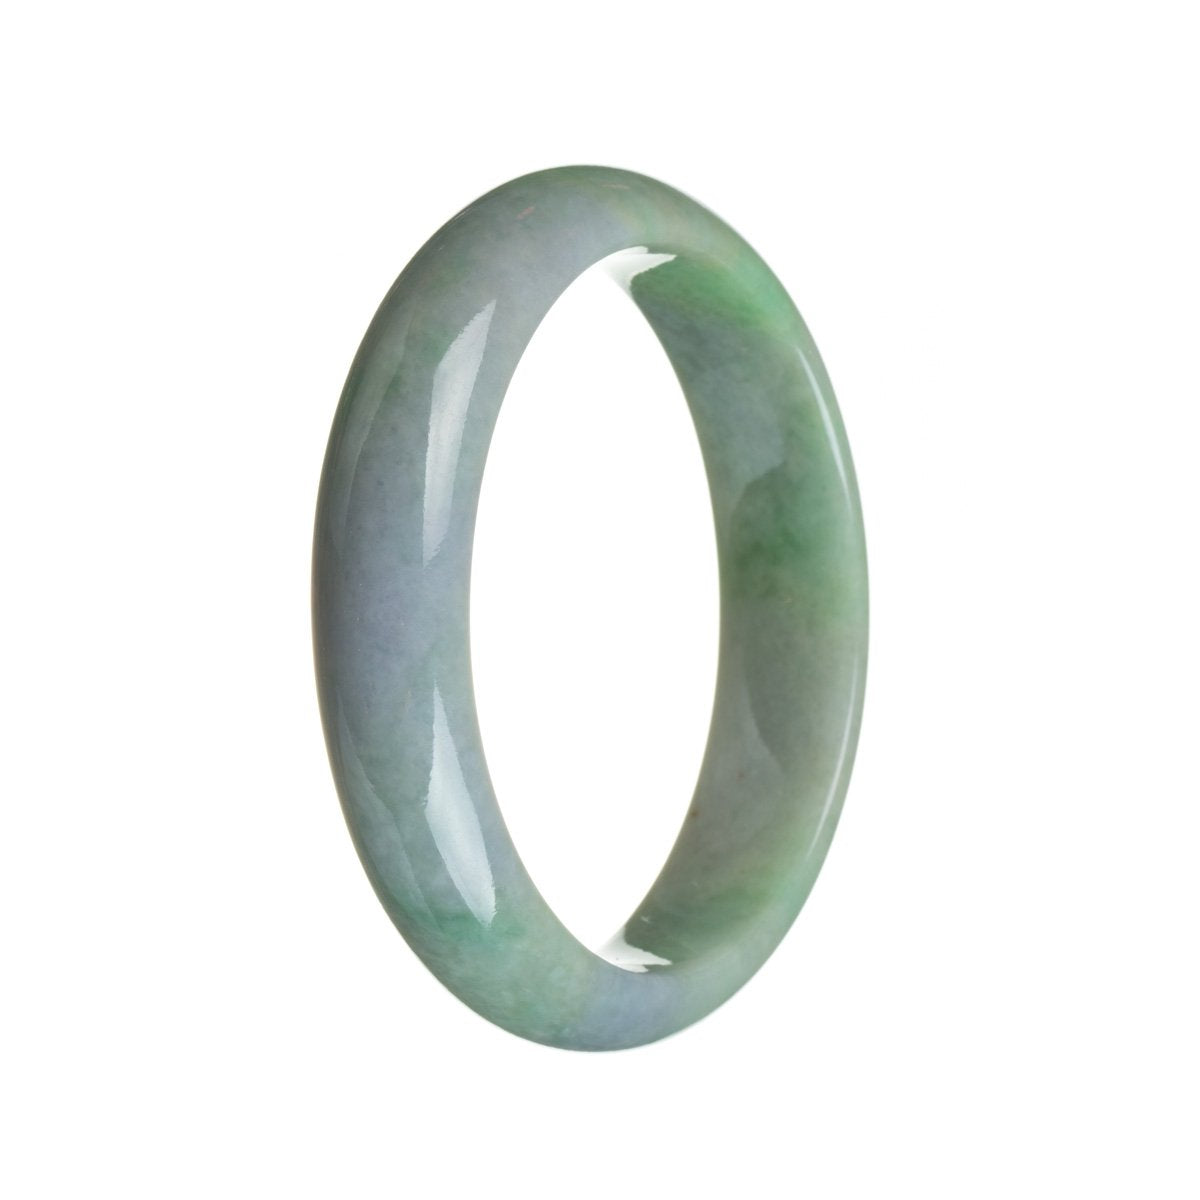 Close-up image of a beautiful, half-moon shaped Burma Jade bangle with a stunning green color and subtle lavender hues.